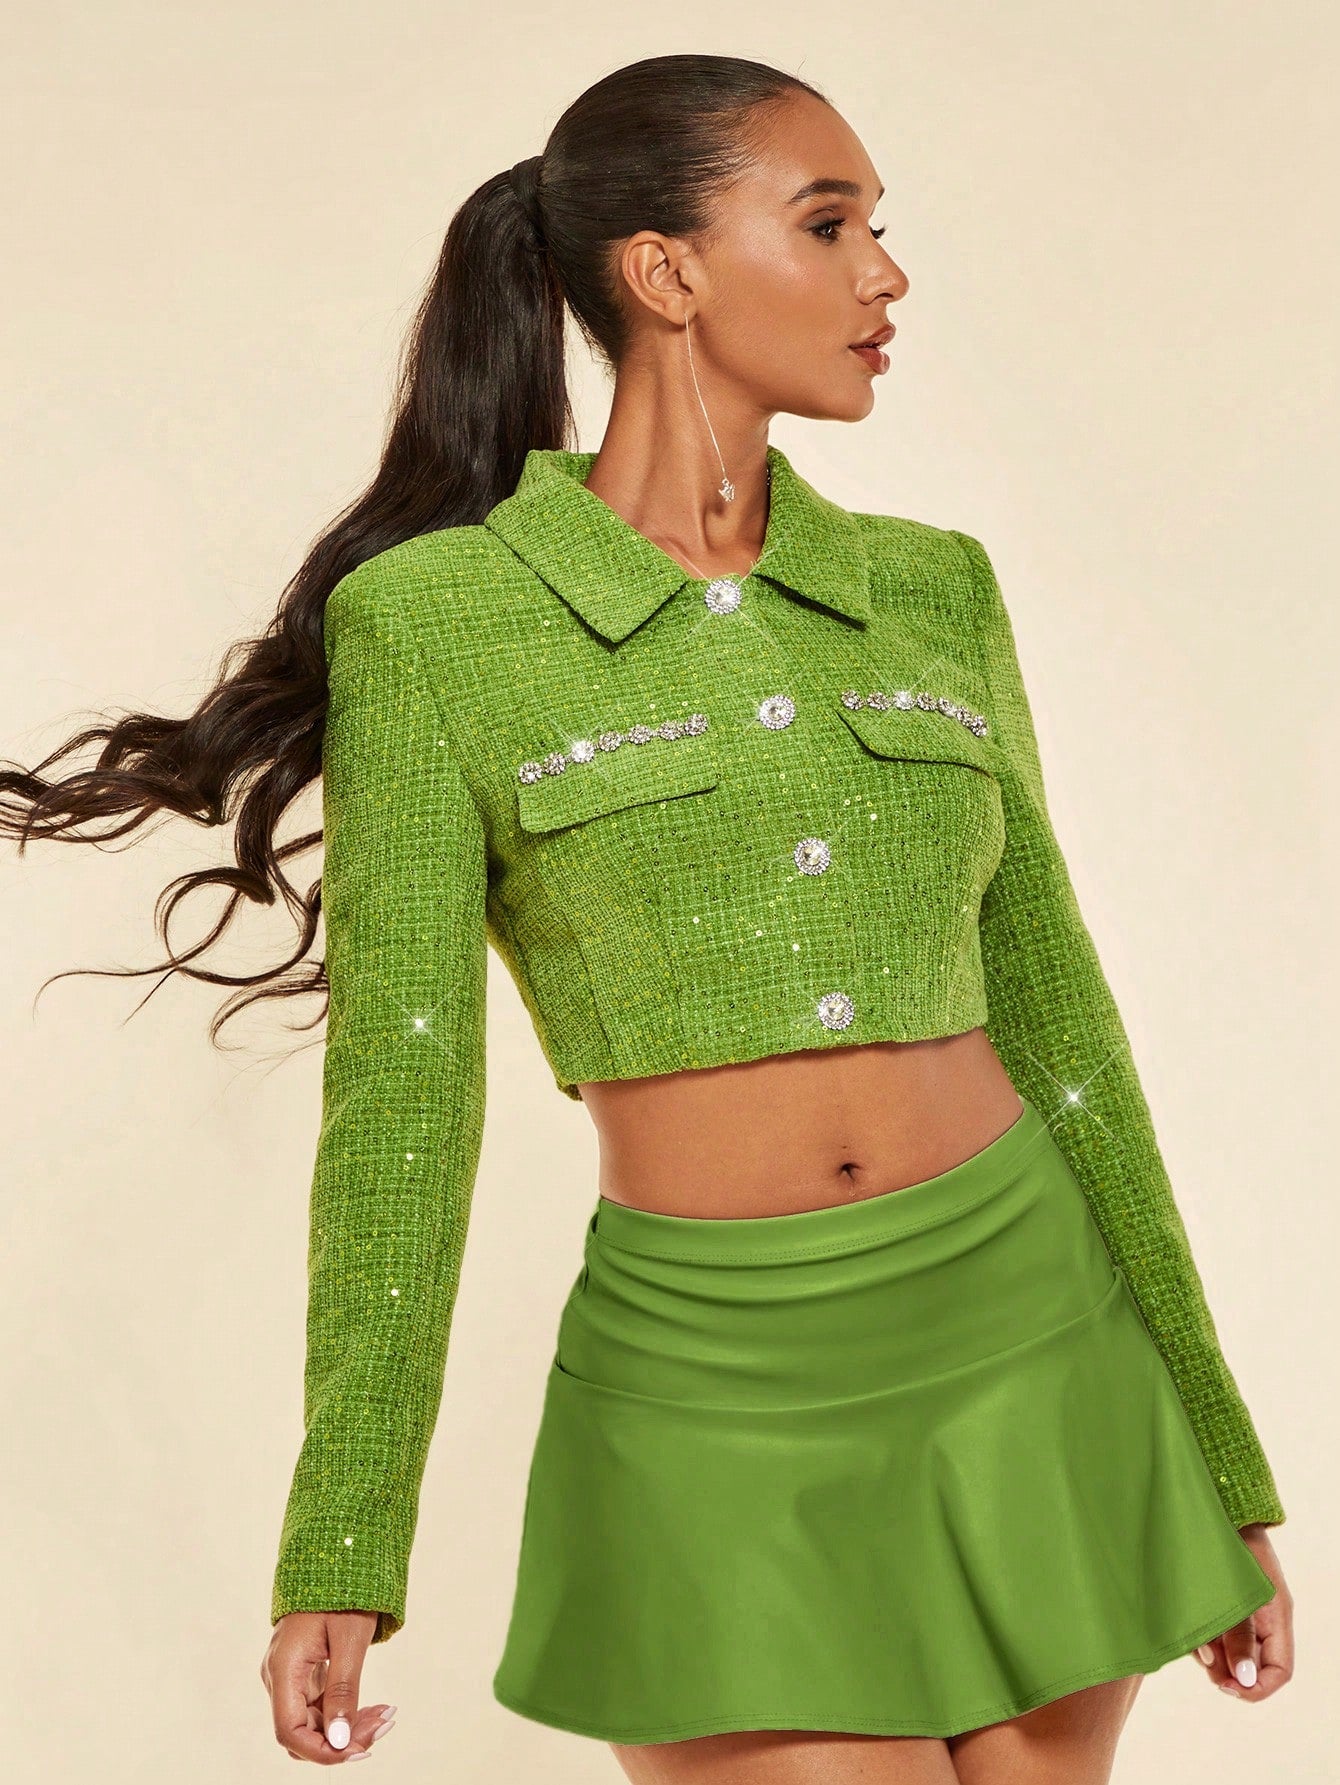 product picture of a model wearing aGreen glitter jacket with a green leather skirt